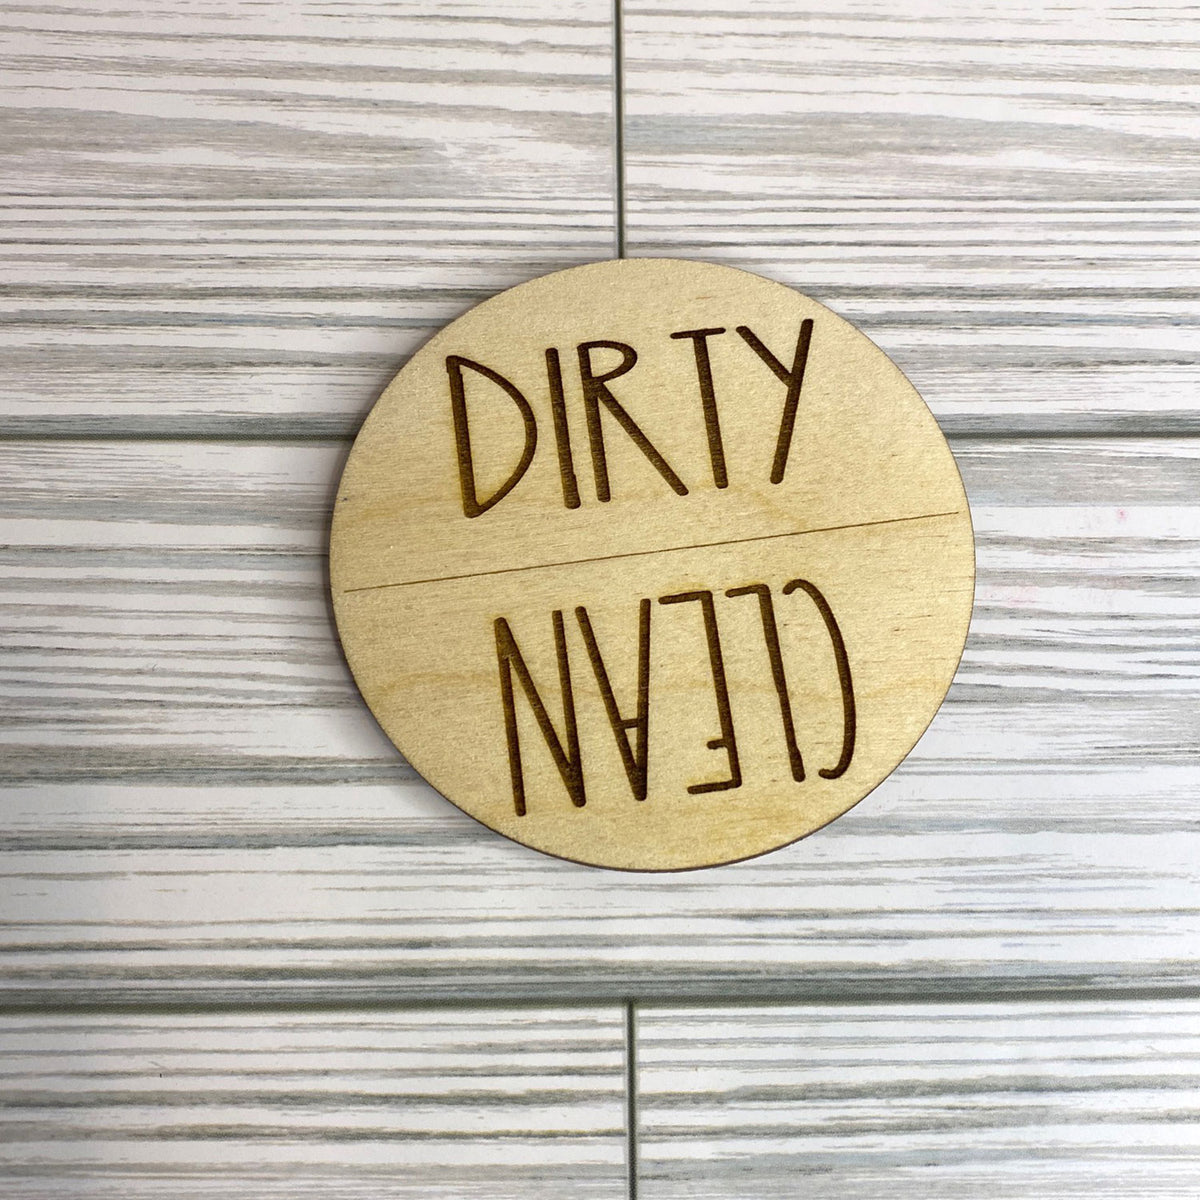 Dirty / Clean Dishwasher Magnet – This Little Workshop